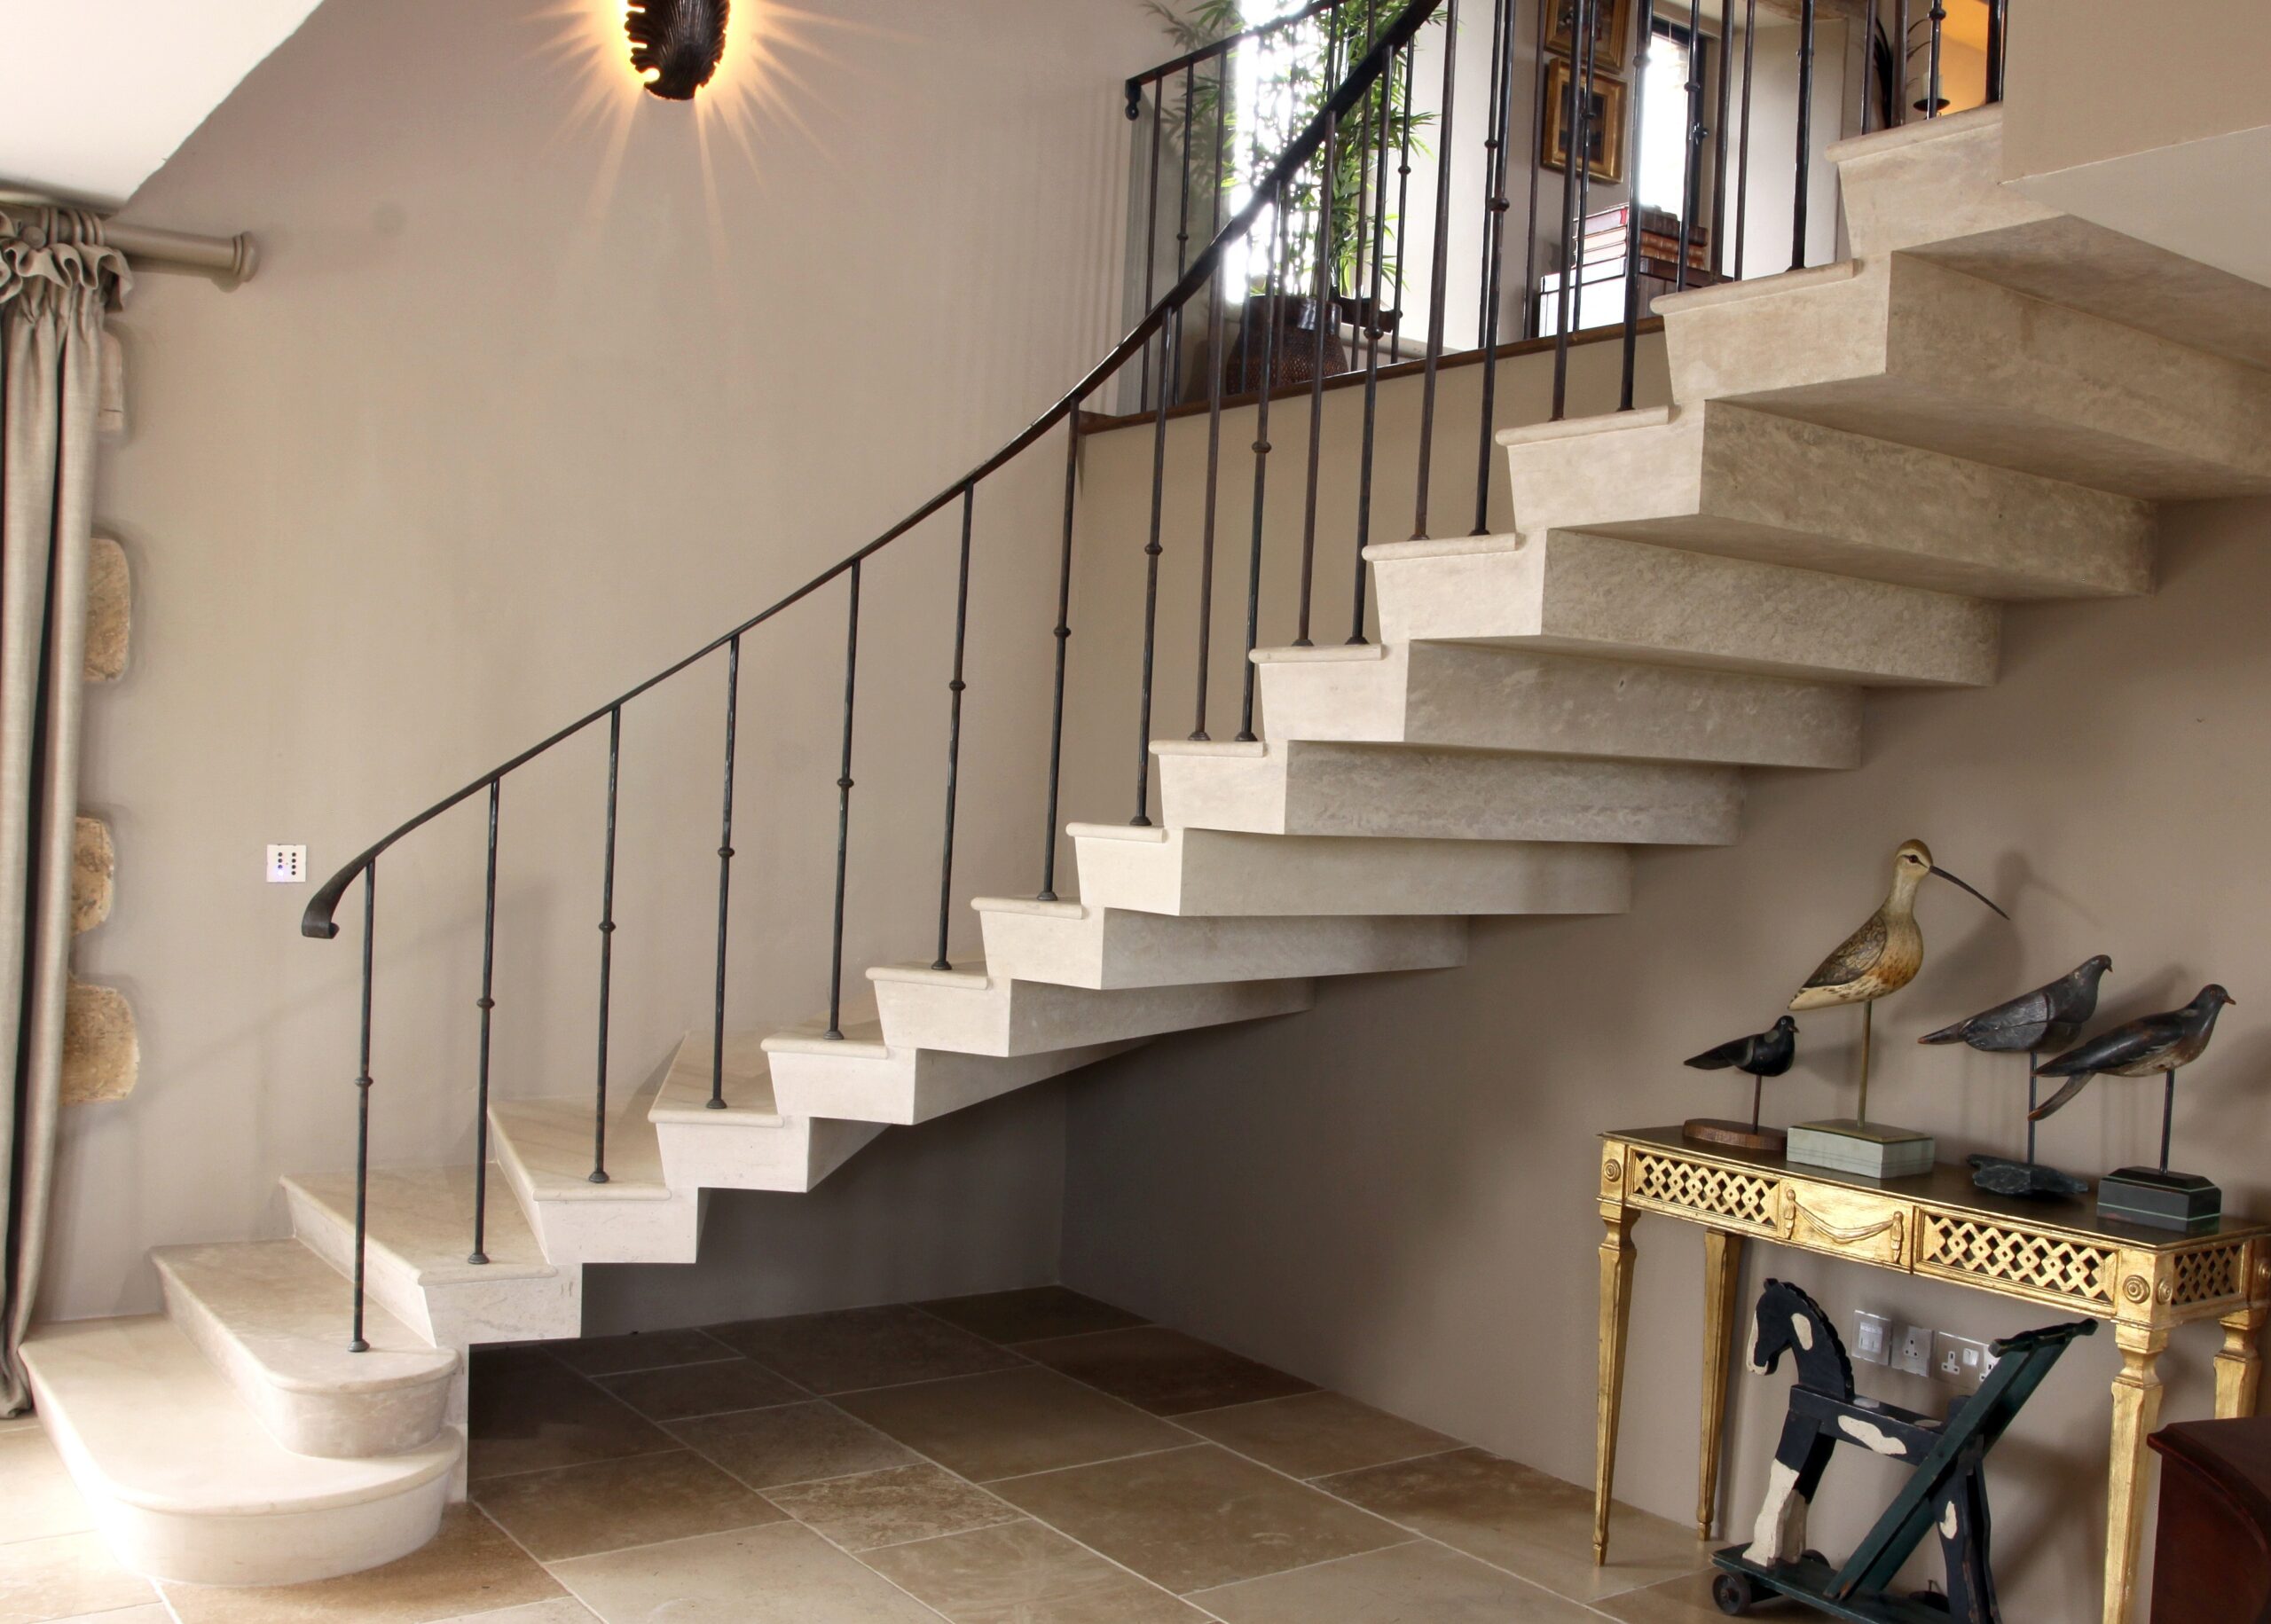 18. Cantilever Roche Marron stone staircase with stepped soffit in a barn conversion – Cotswolds